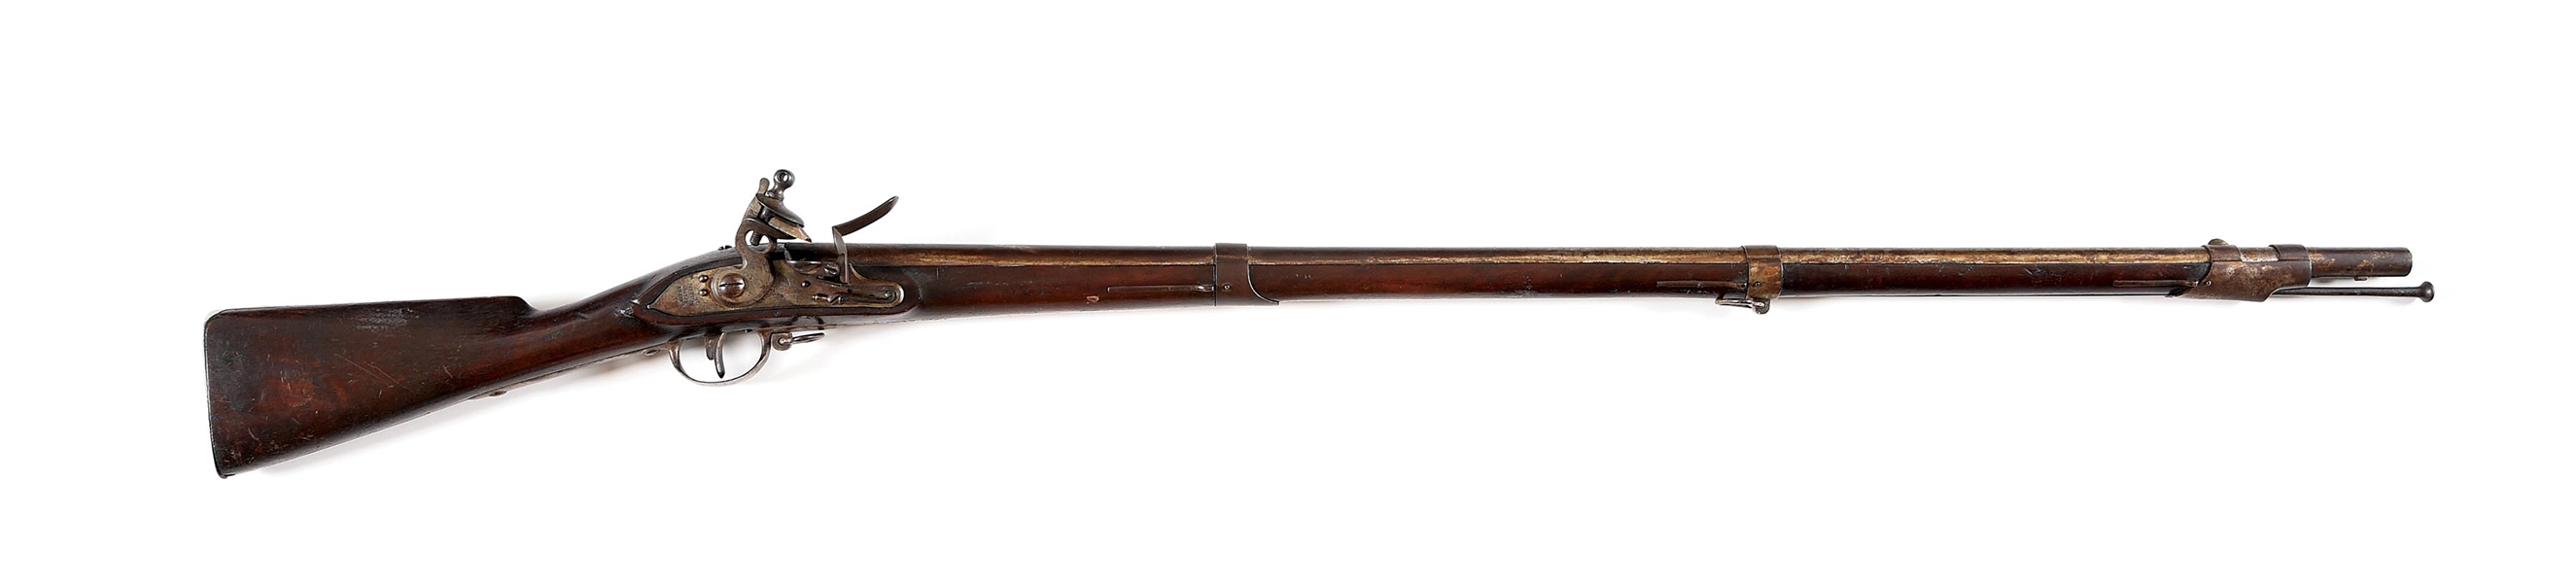 (A) MARYLAND AND REGIMENTALLY BRANDED MODEL 1808 CONTRACT MUSKET BY NIPPES.